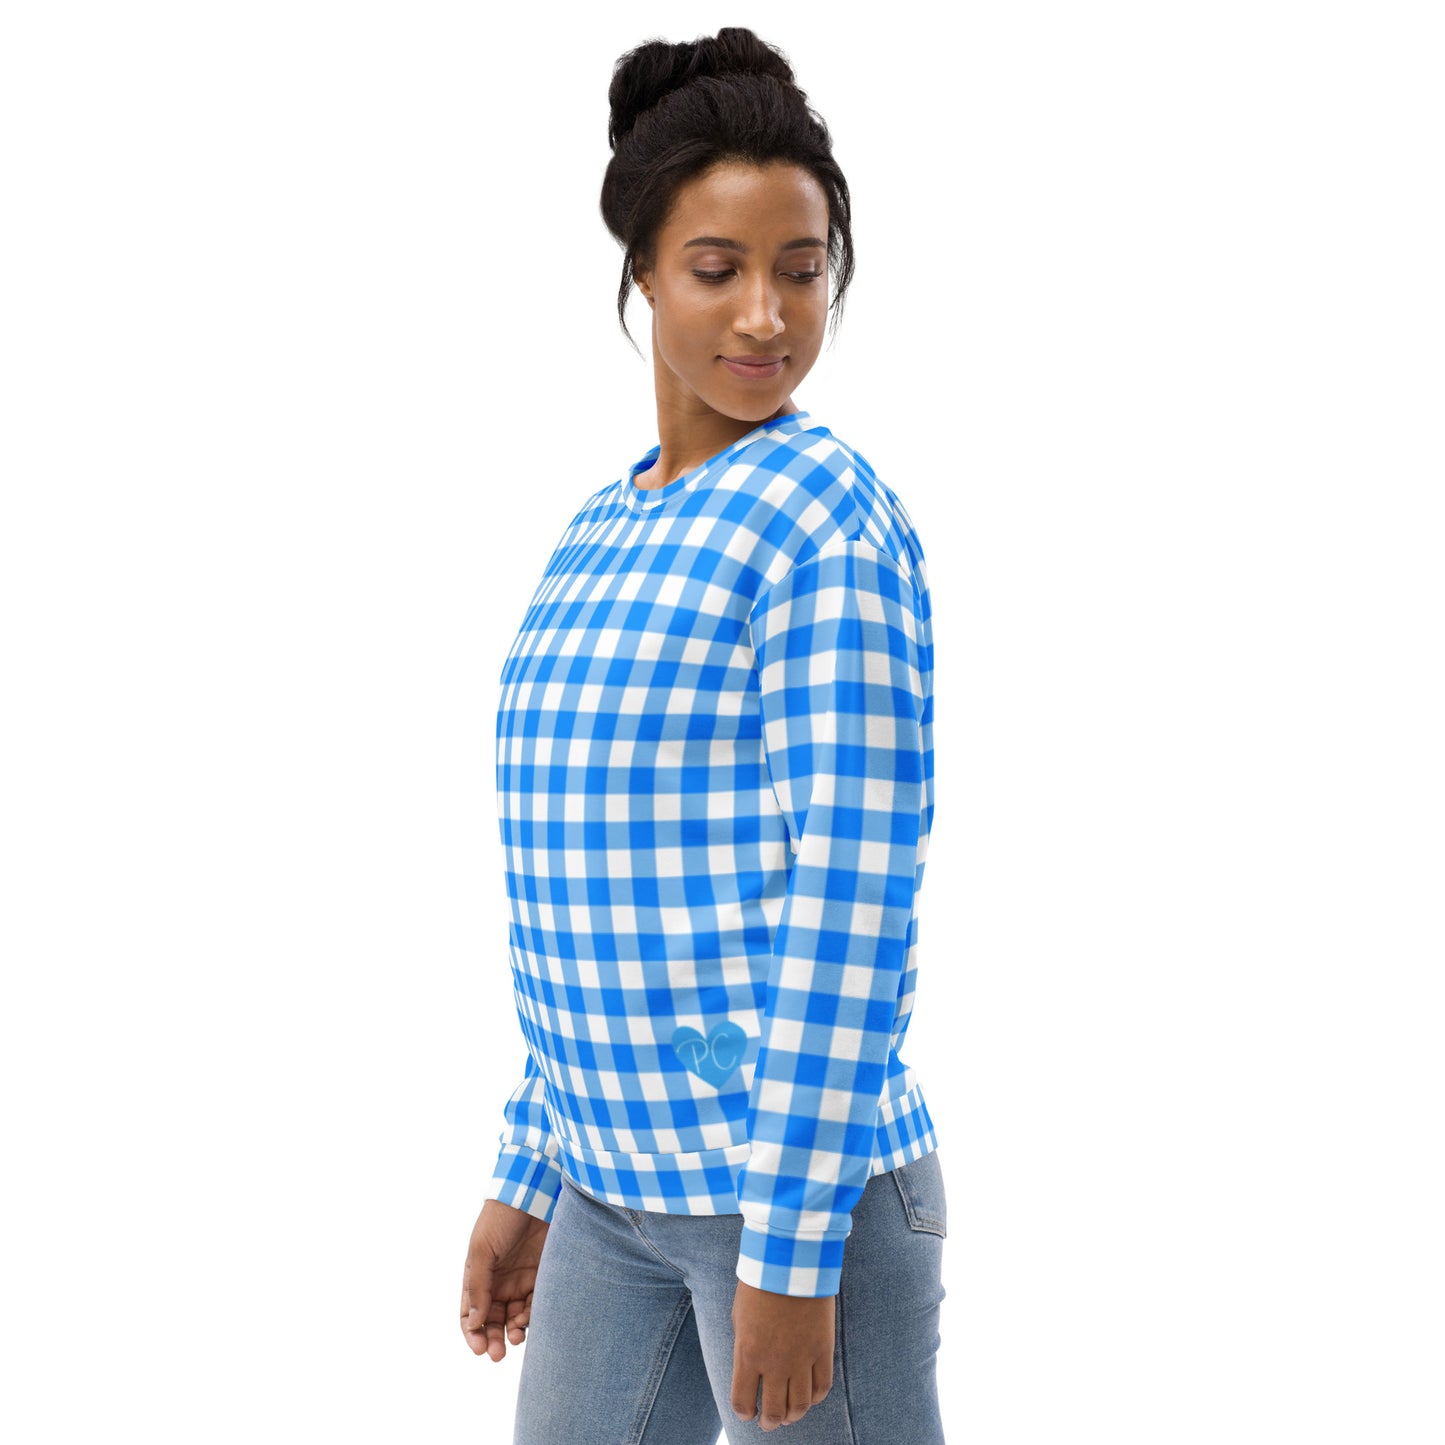 Beyond Blue Gingham Long-Sleeved Crewneck Sweatshirt | Pinup Couture Relaxed